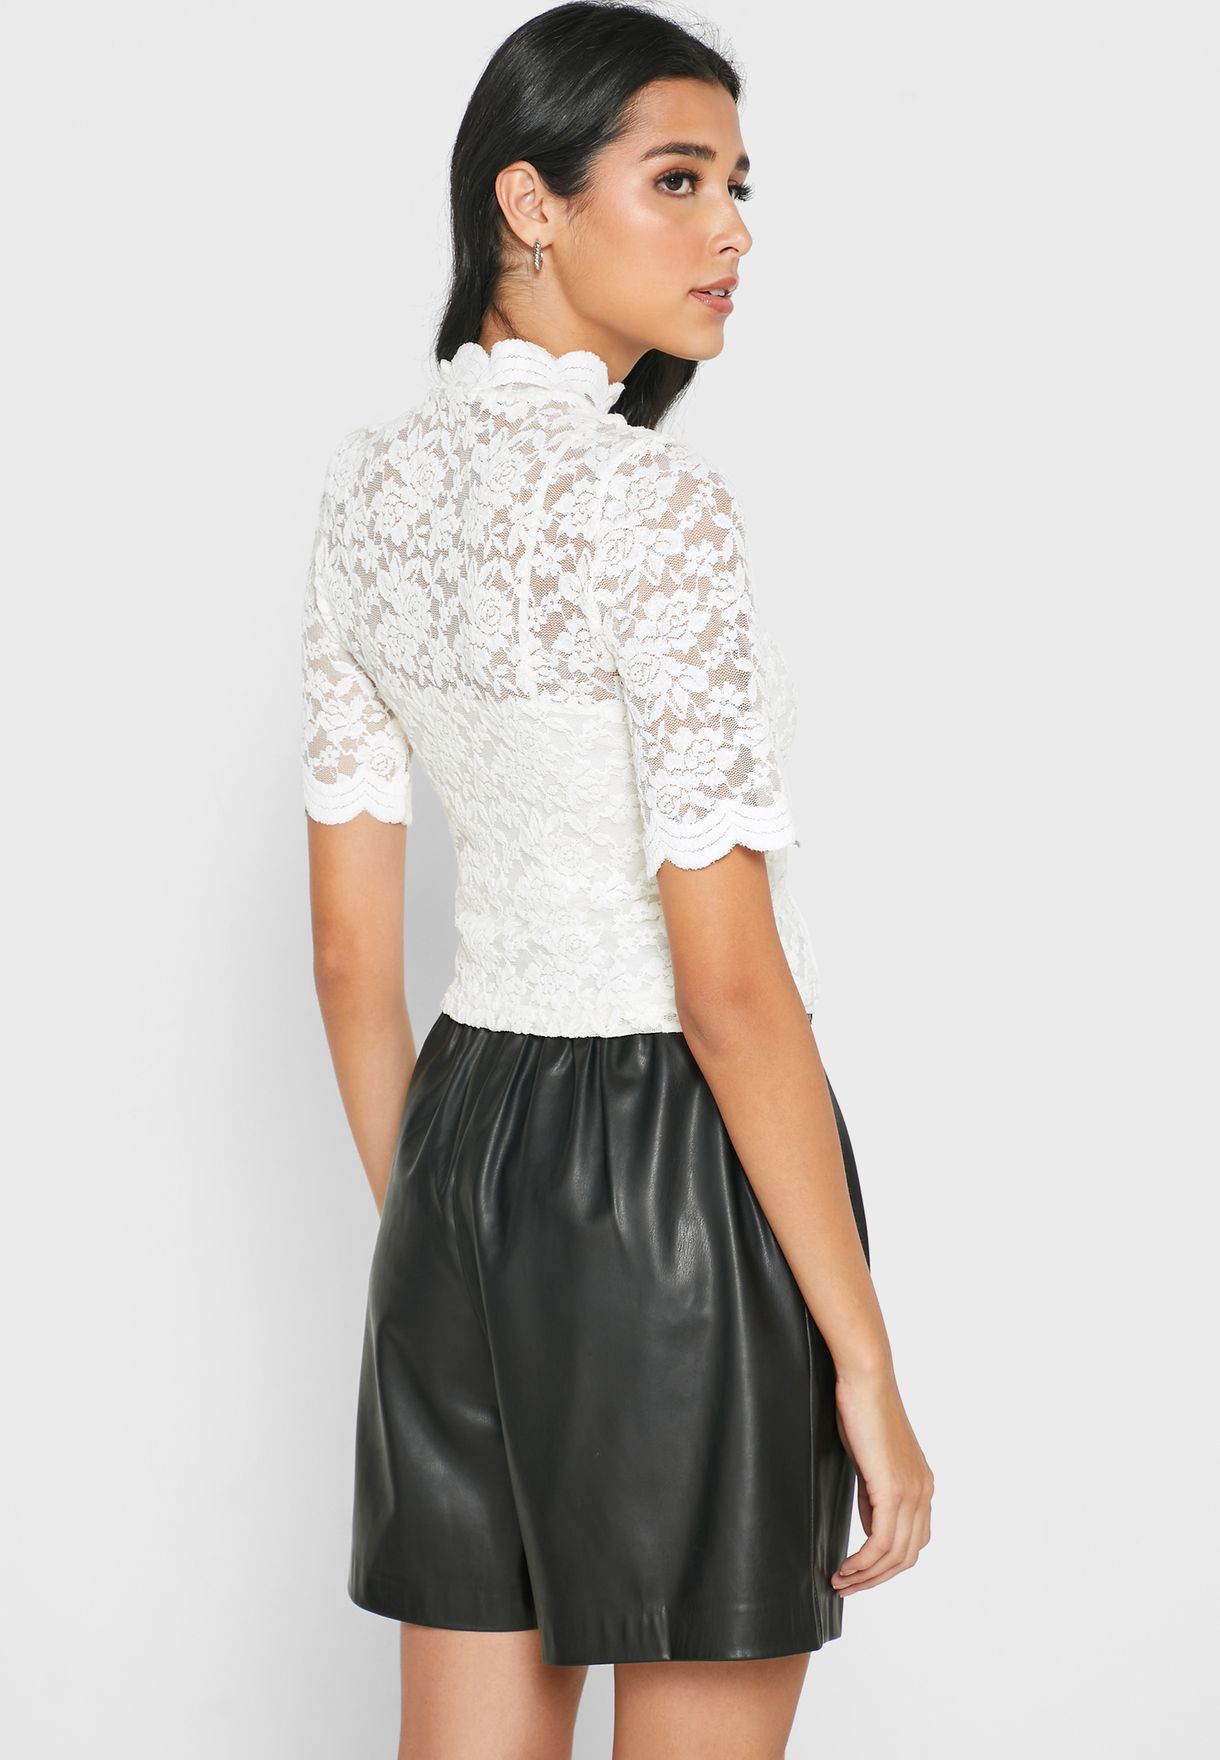 Scallop Detail High Neck Lace Top 